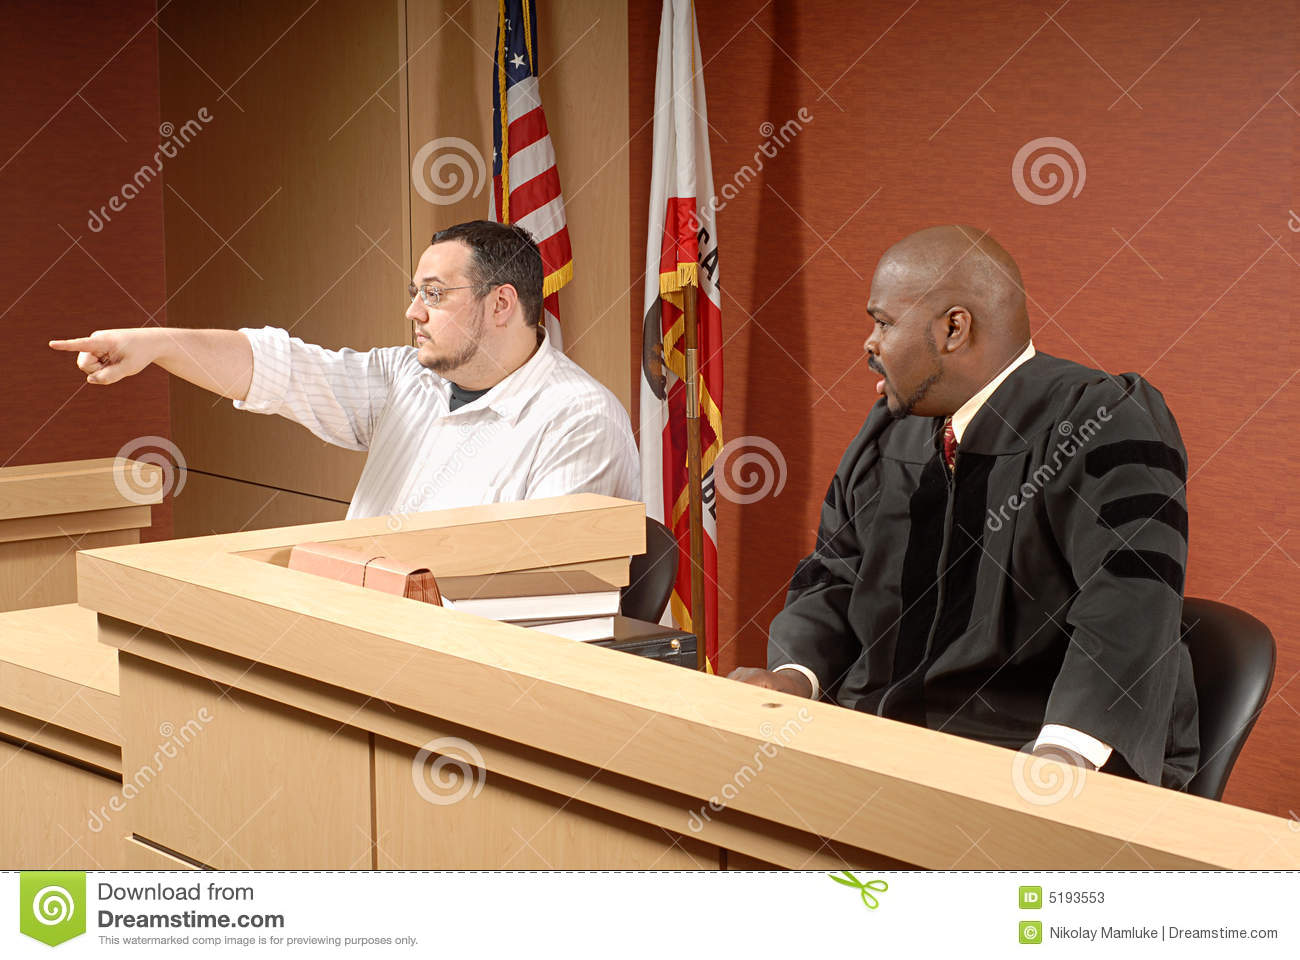 Man Acting As A Witness Pointing Out Someone To The Judge